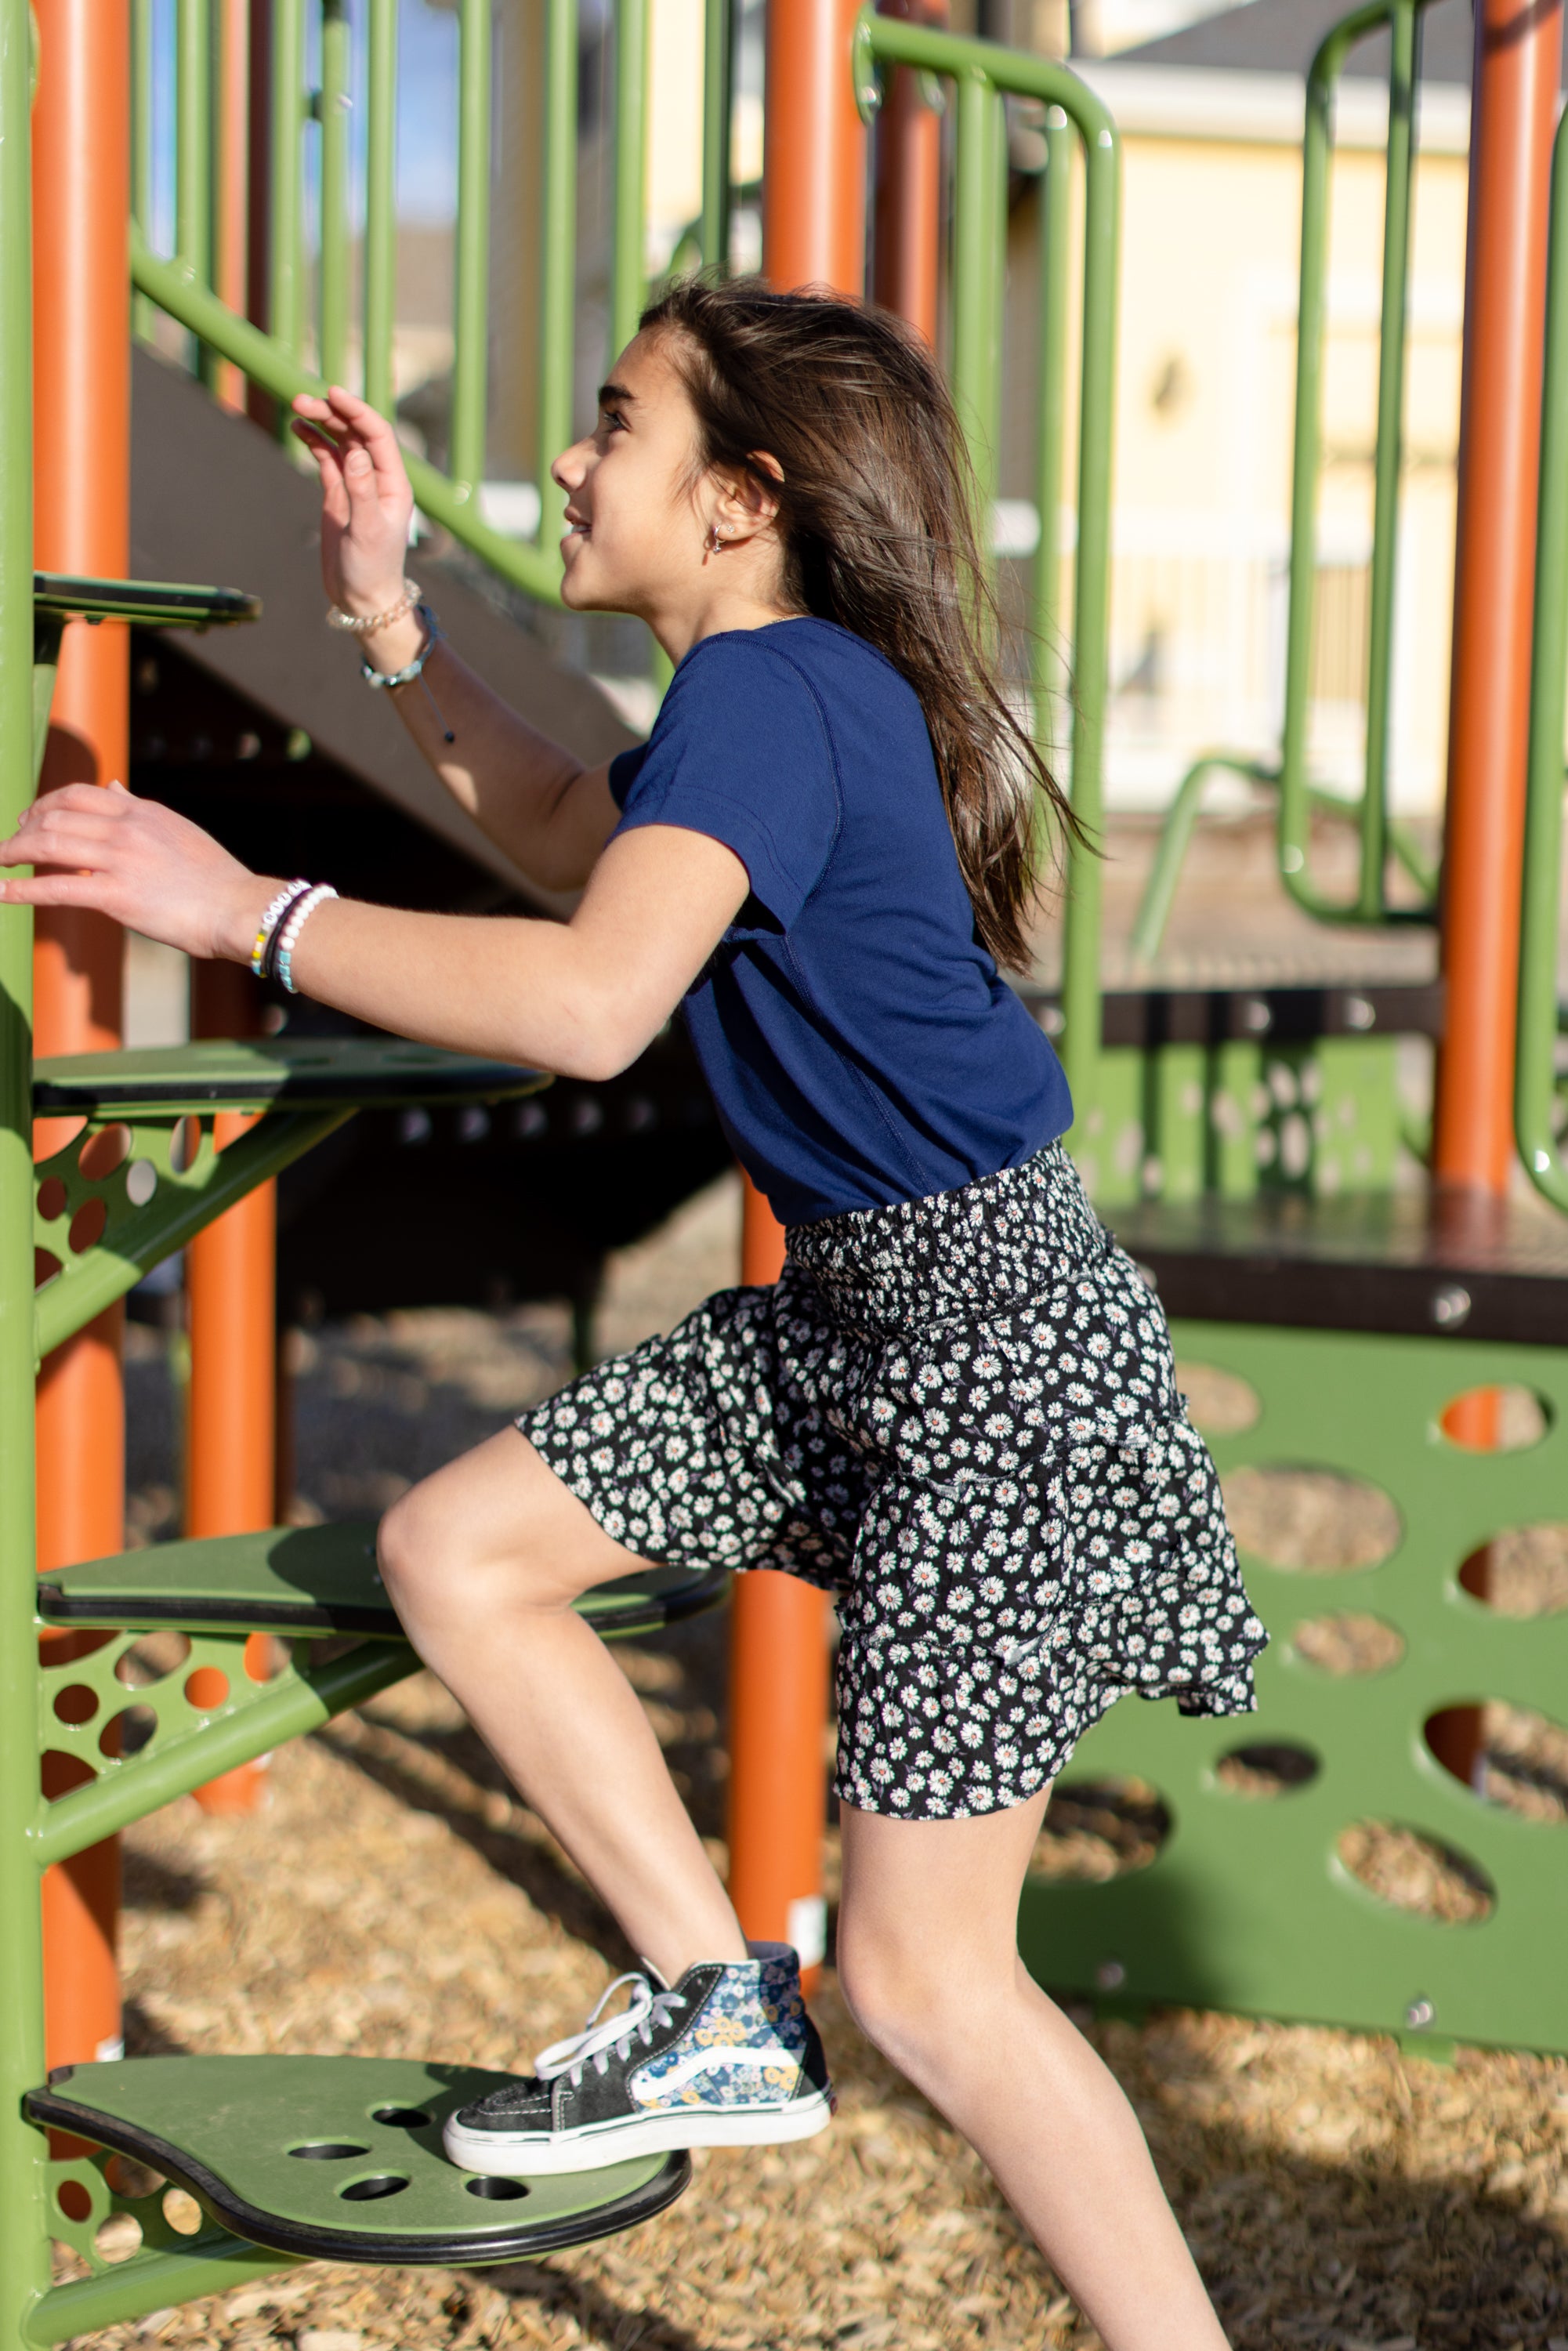 A little girl is wearing a navy blue crewneck t-shirt. She is wearing a black and white skirt with black and white shoes. She is also climbing on a jungle gym. The colors of the jungle gym are orange, green and black.